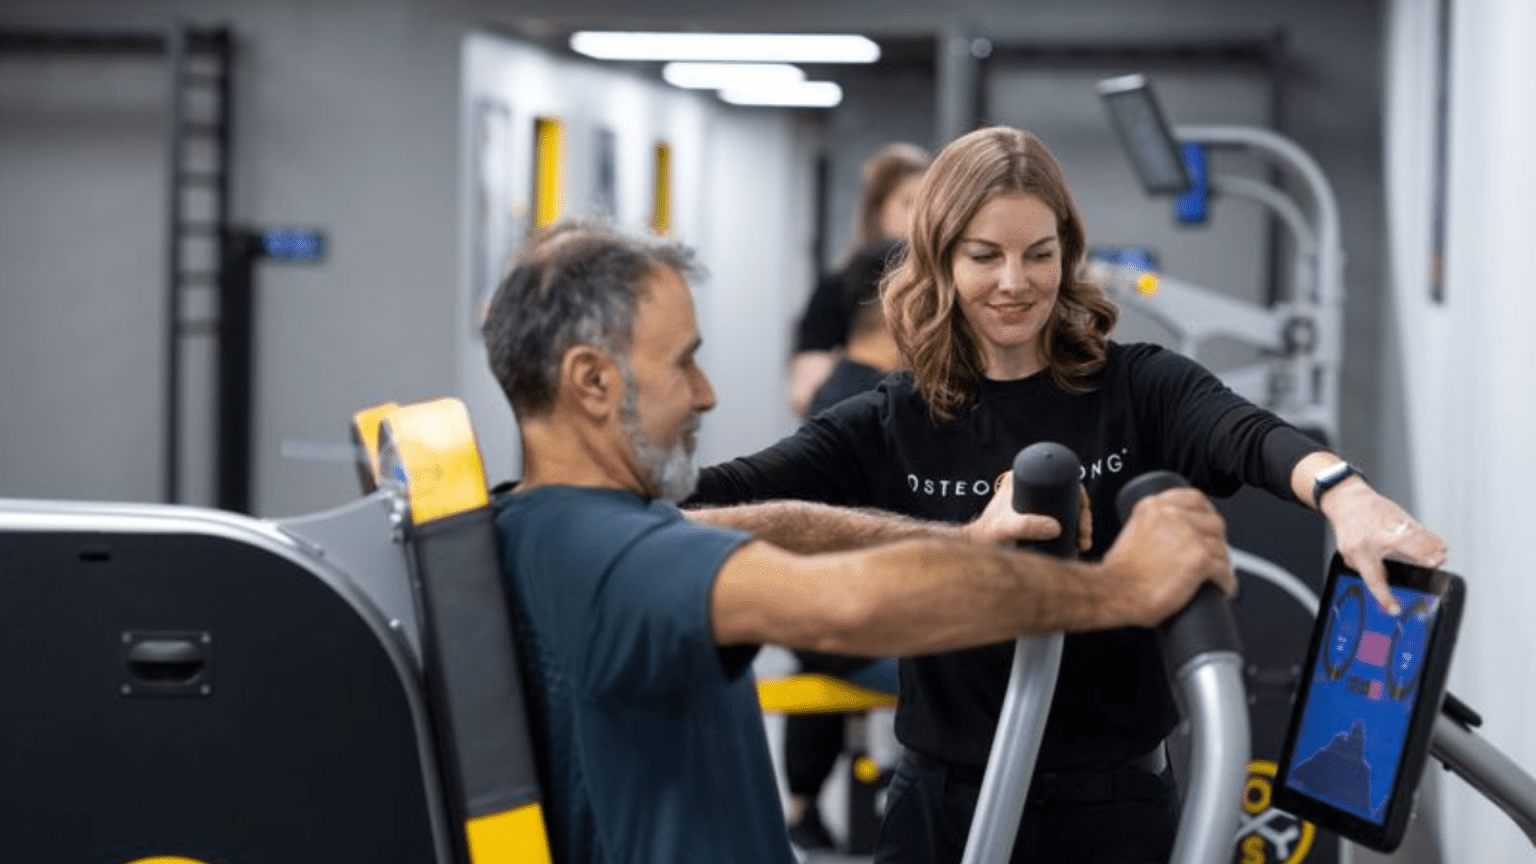 A woman in an OsteoStrong shirt assists an older man using exercise equipment, monitoring his progress on a screen.